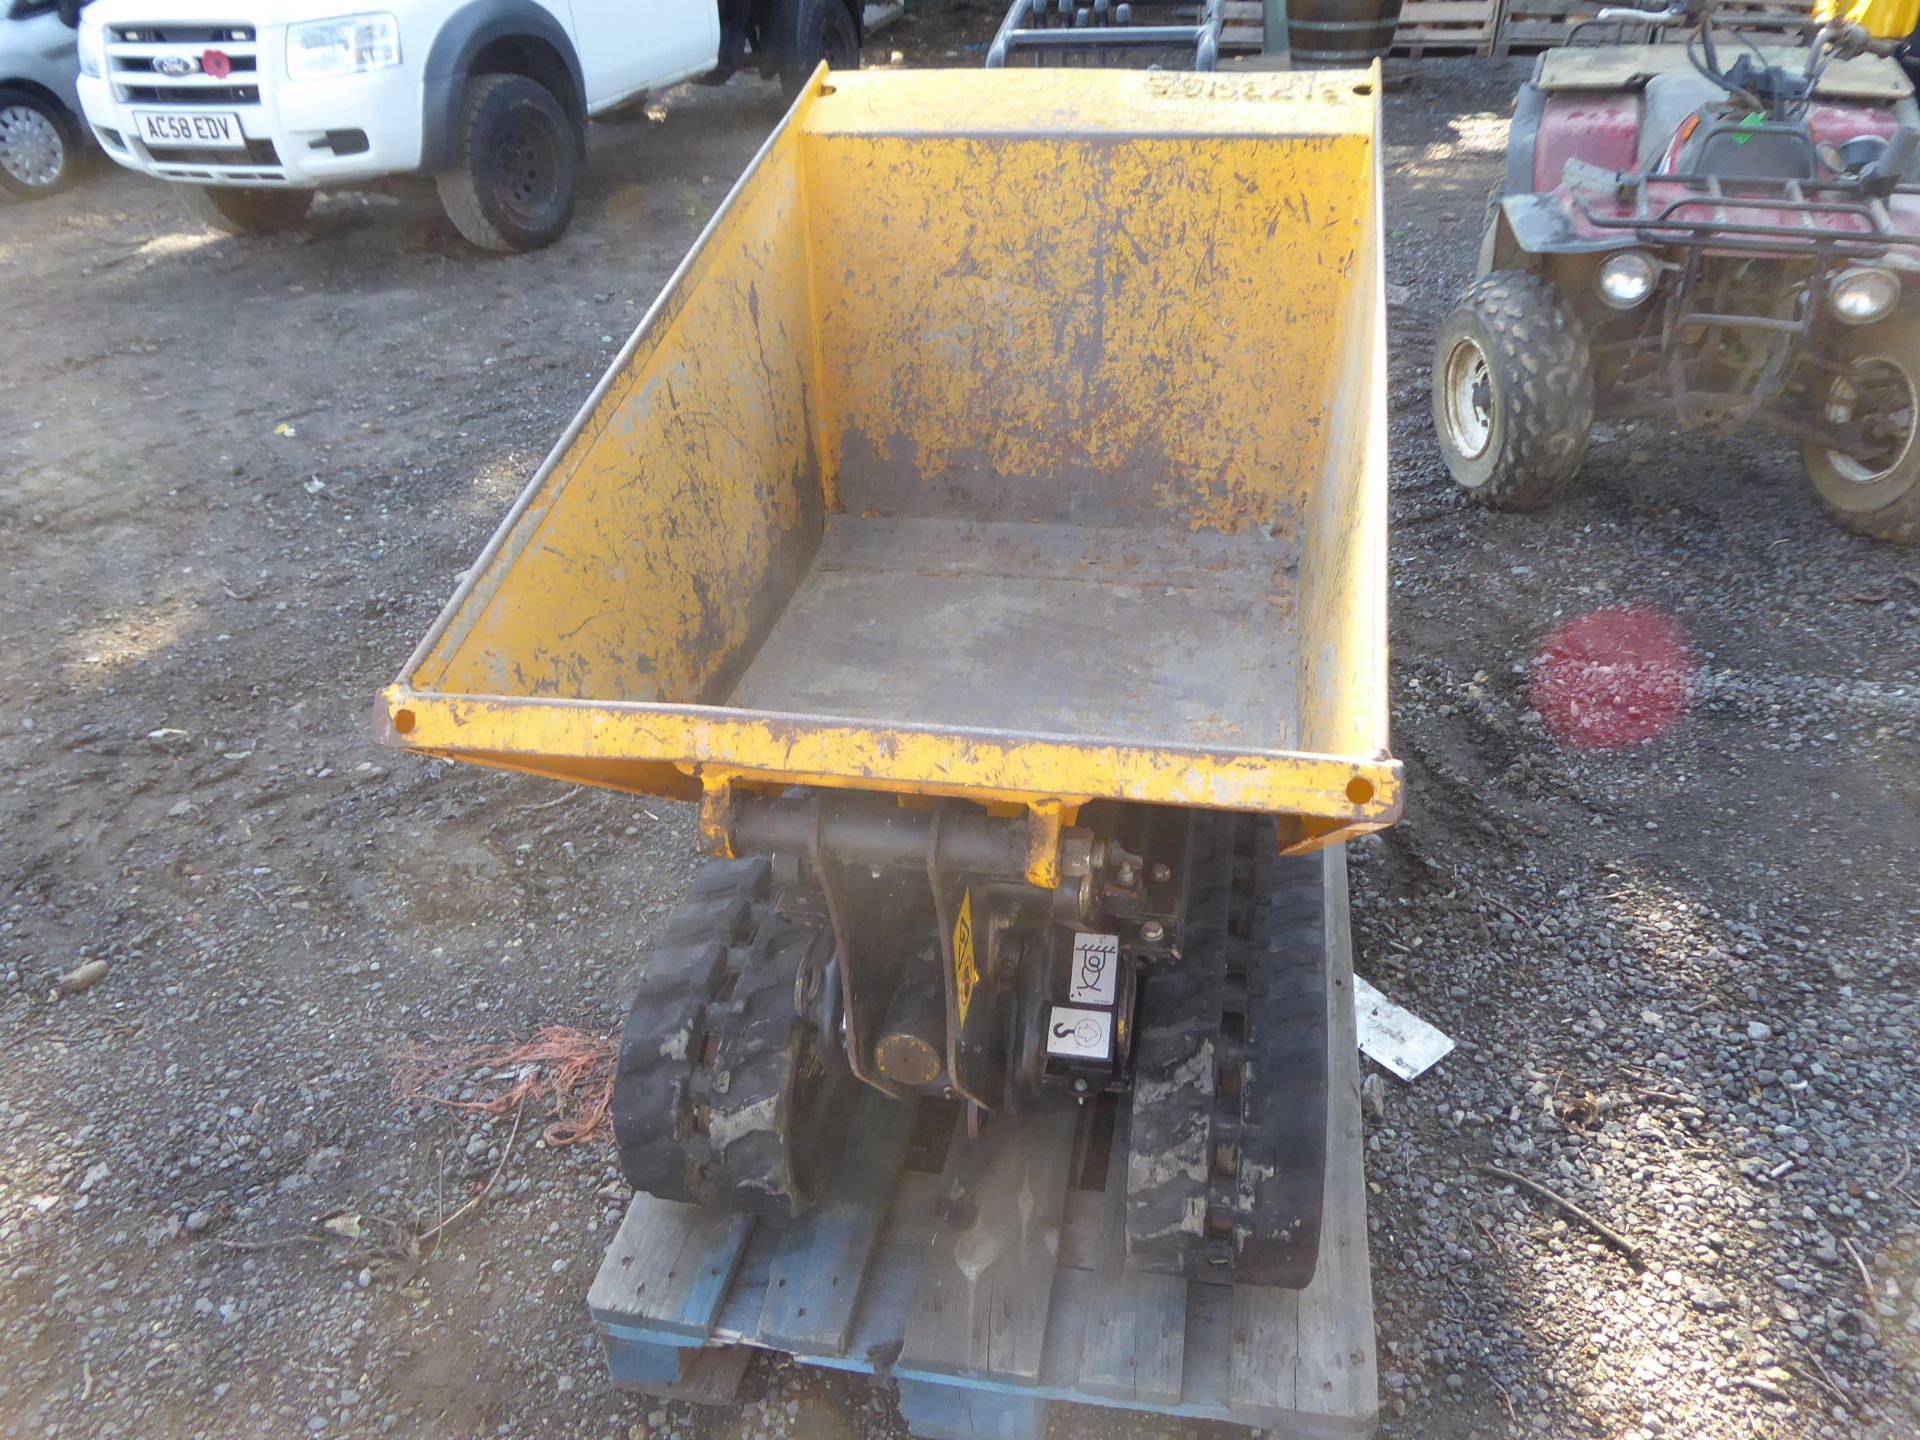 JCB HTD5 tracked dumper, recently serviced, gwo - Image 2 of 3